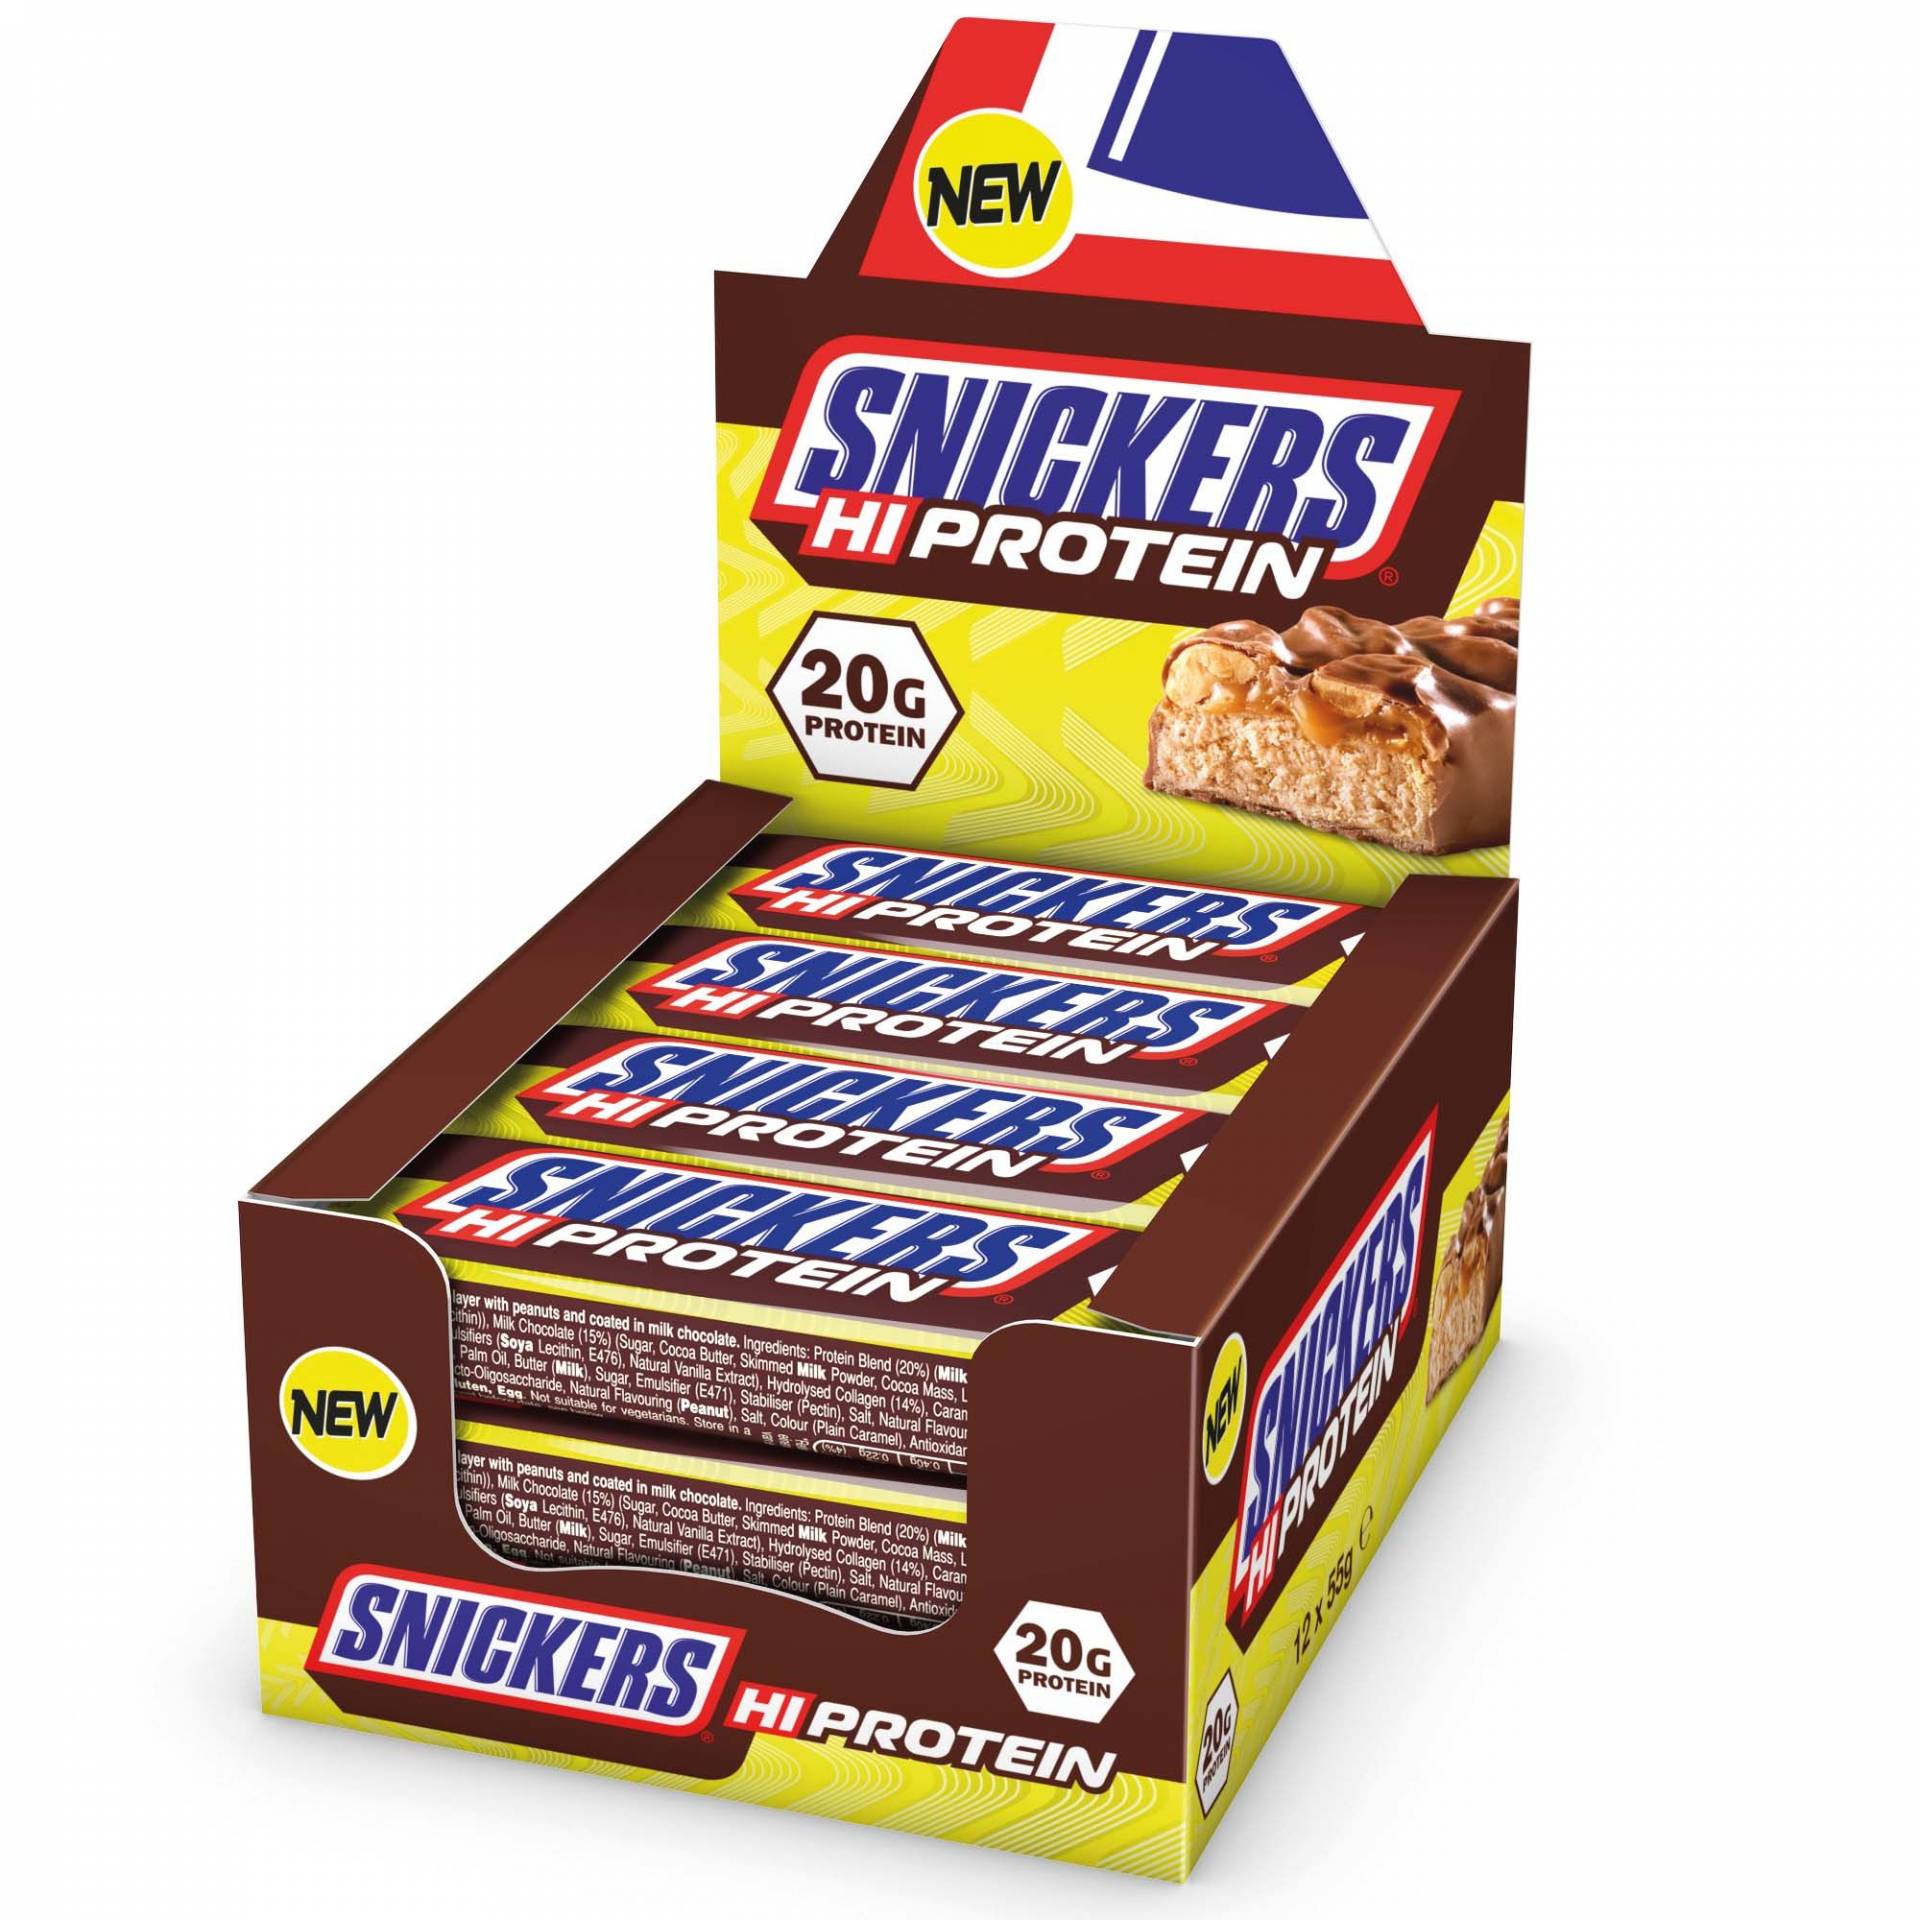 Snickers High Protein Bars - $4.49